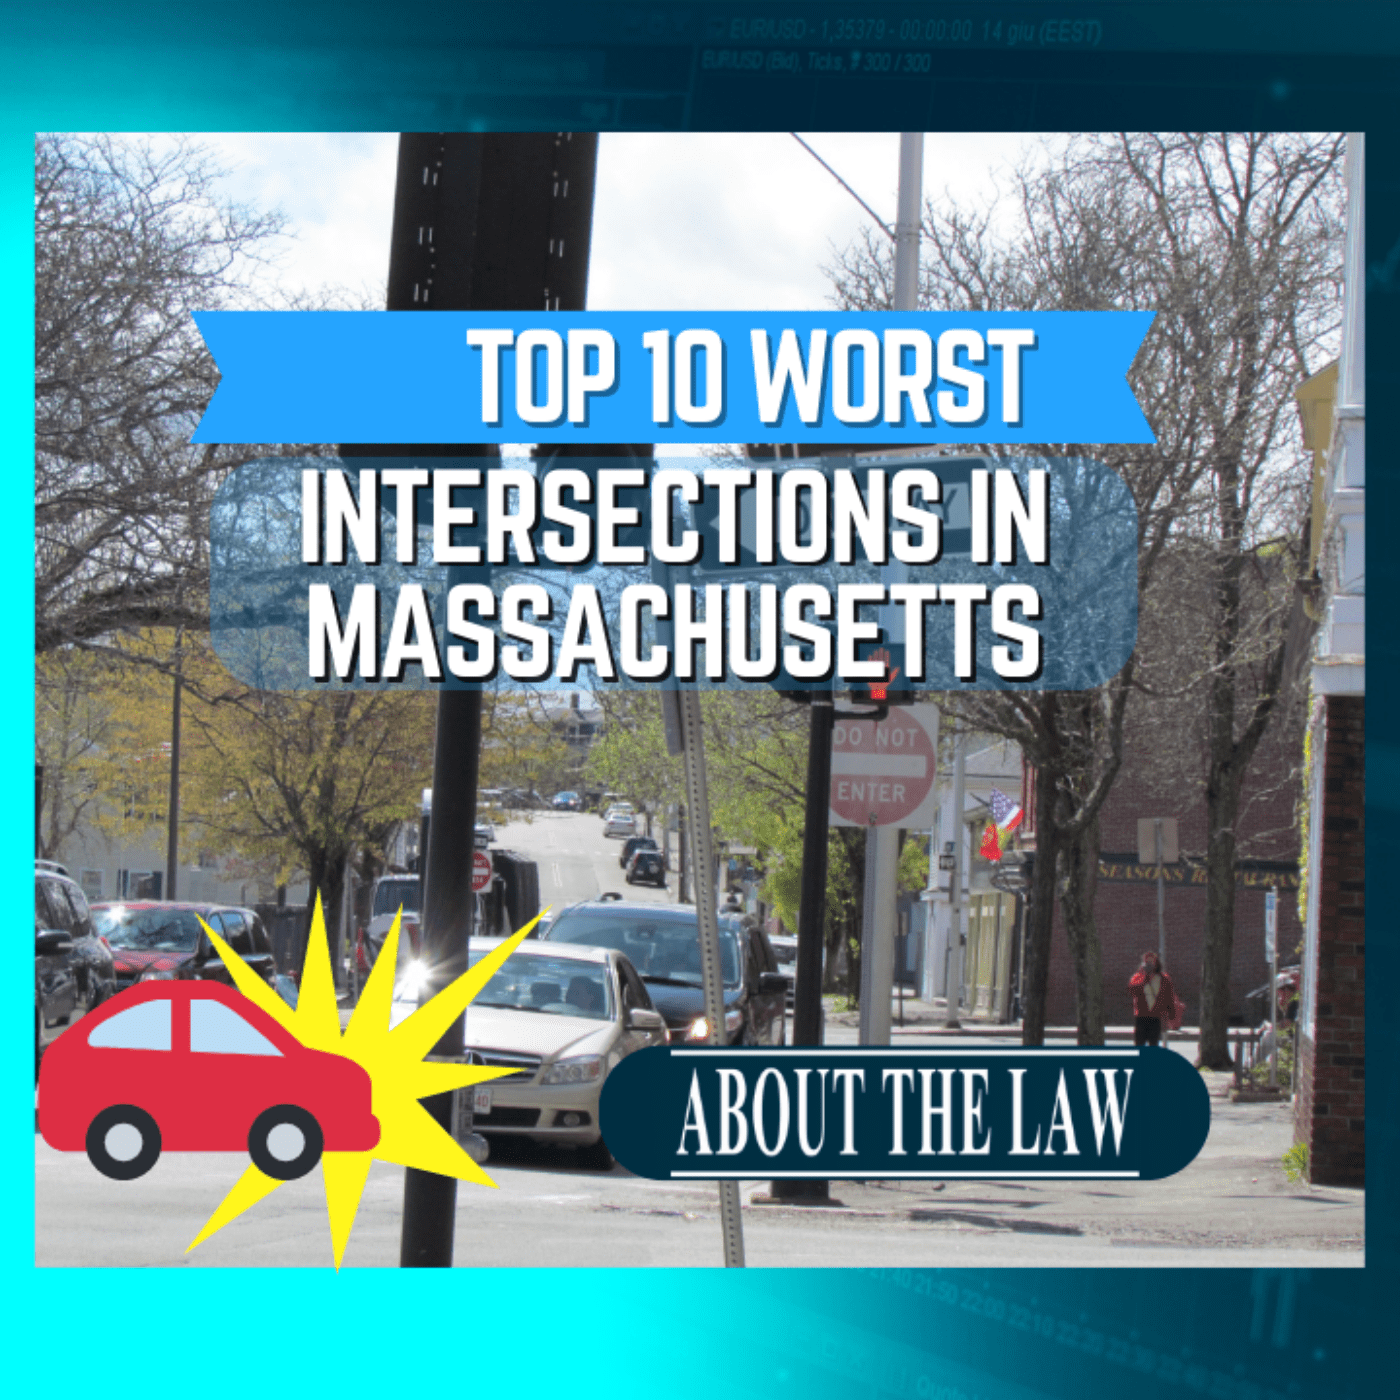 "top 10 worst intersections in Massachusetts" over a picture of a road